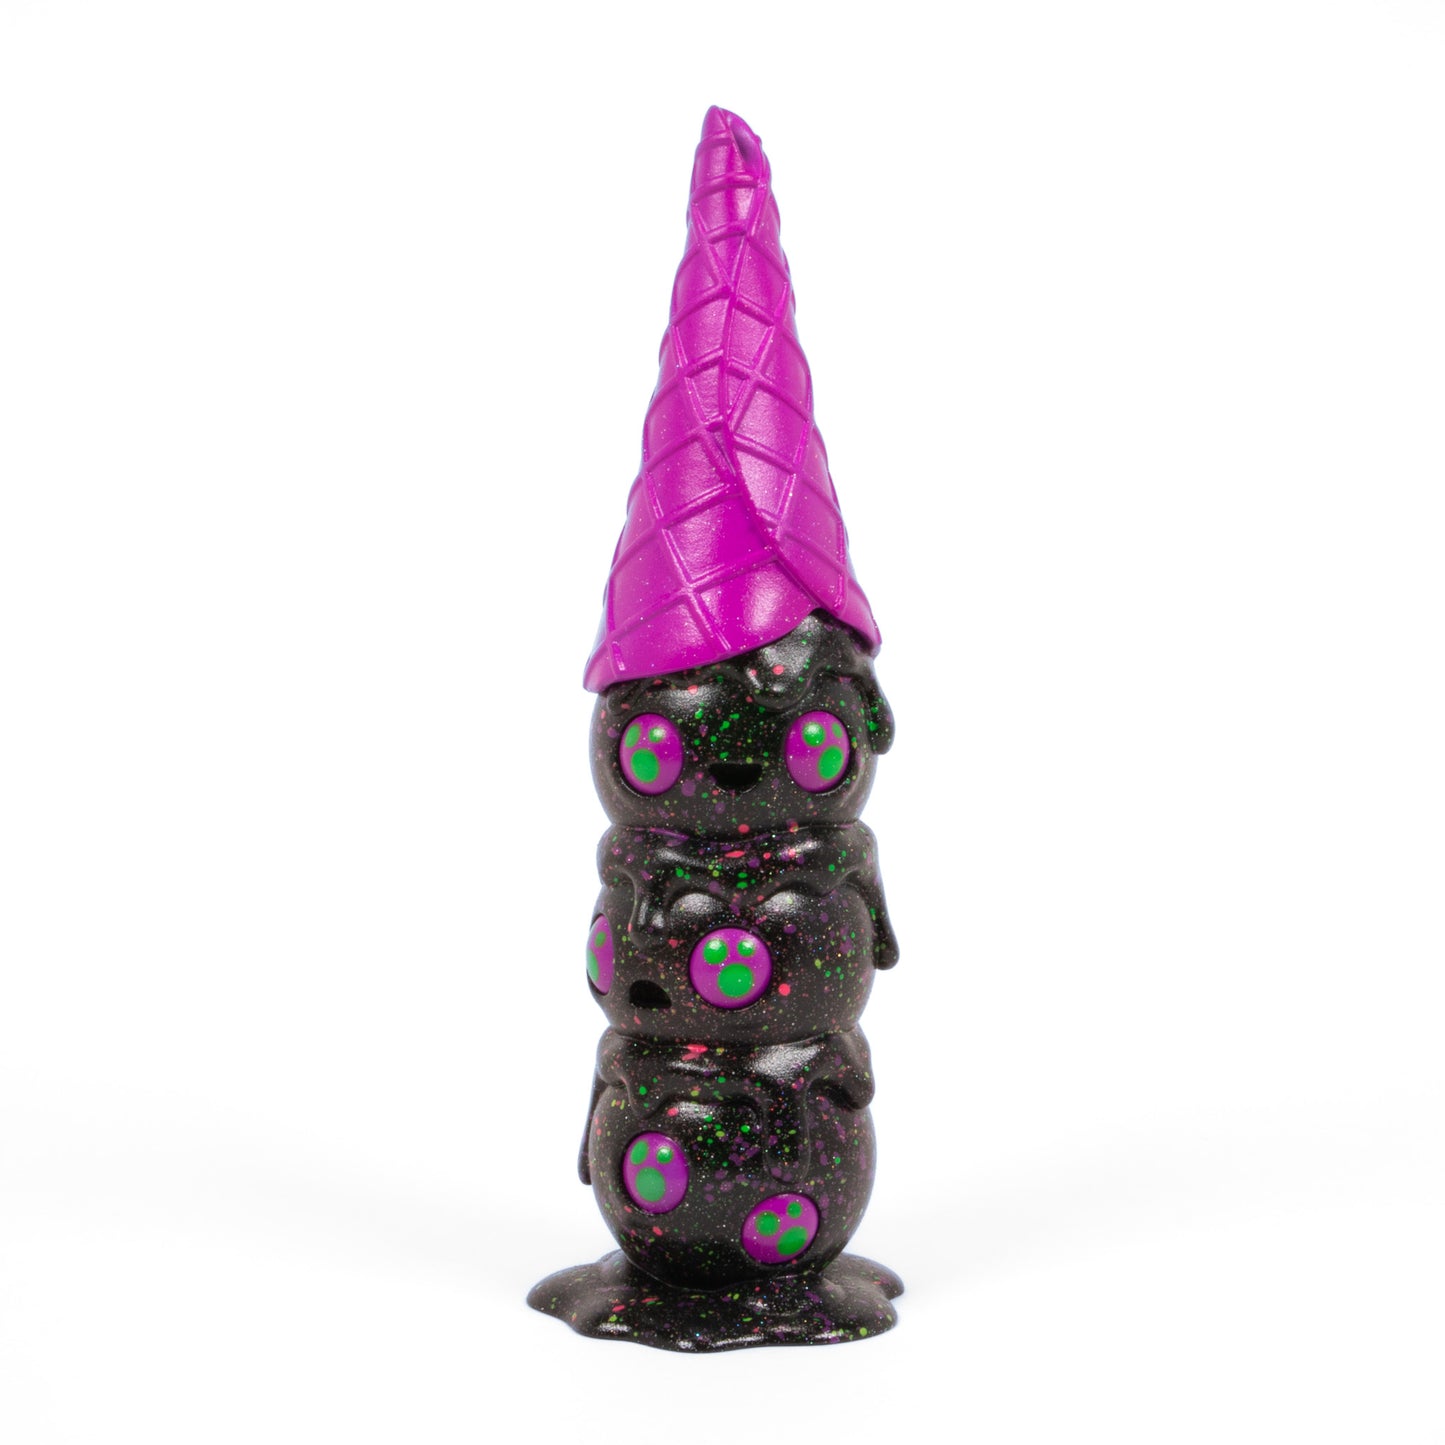 This is Wafull Neon Abyss Limited Edition Hand-Painted Resin Figure